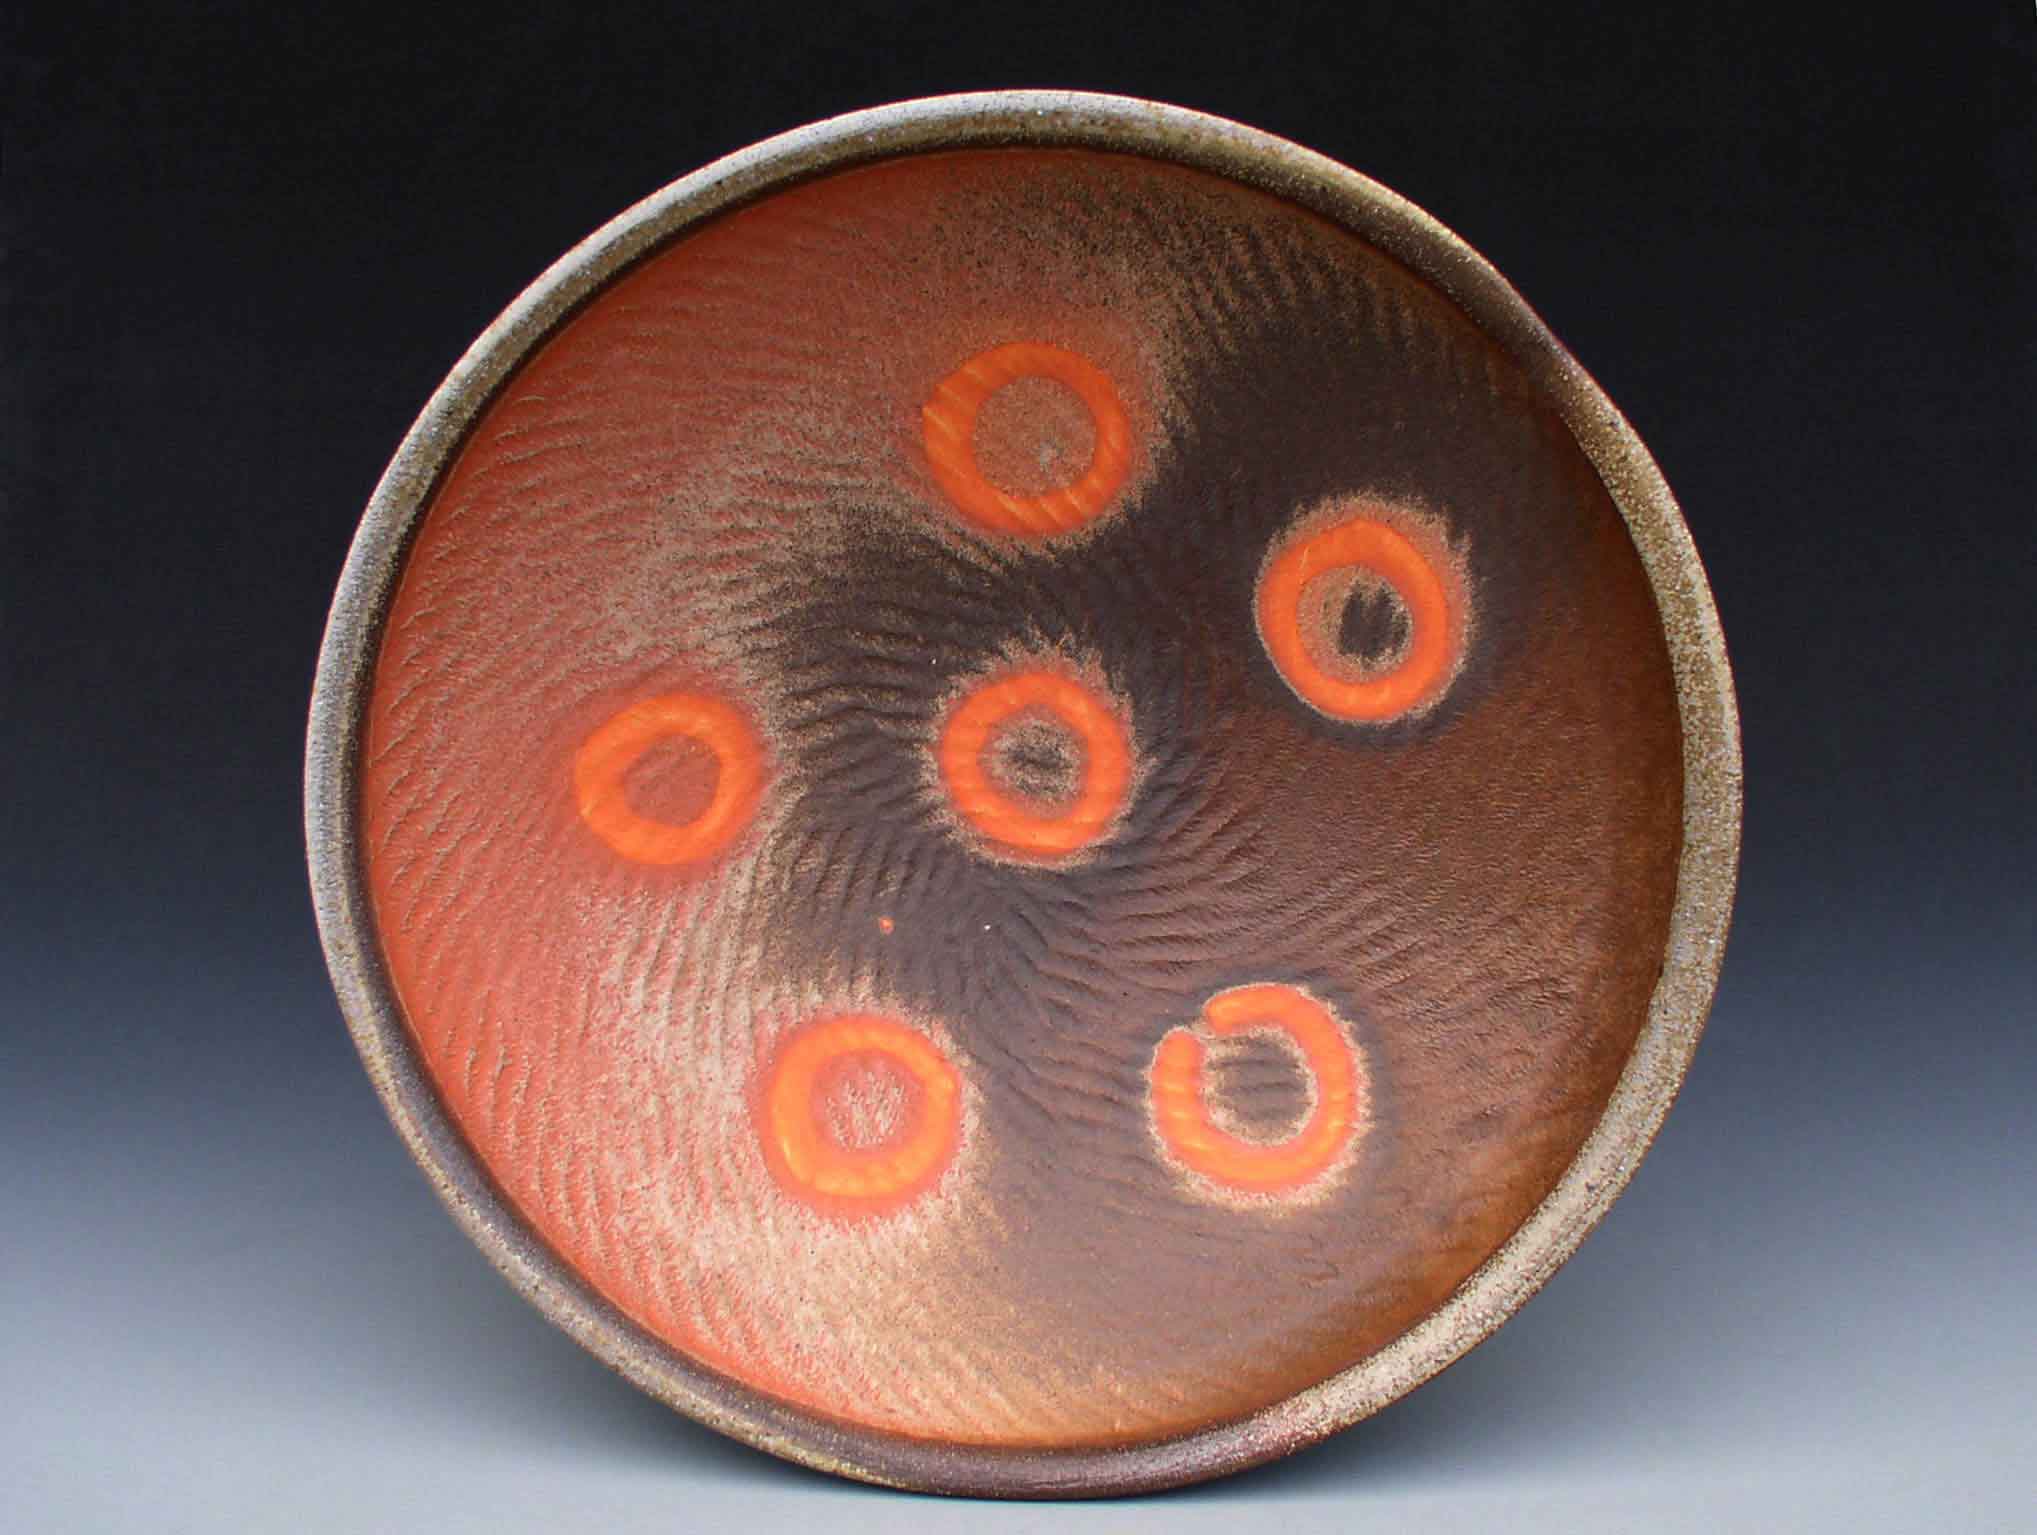 Simon Levin. Cheerio Bowl, 2008. Stoneware with avery slip liner and rope pattern. 15 x 5 in.